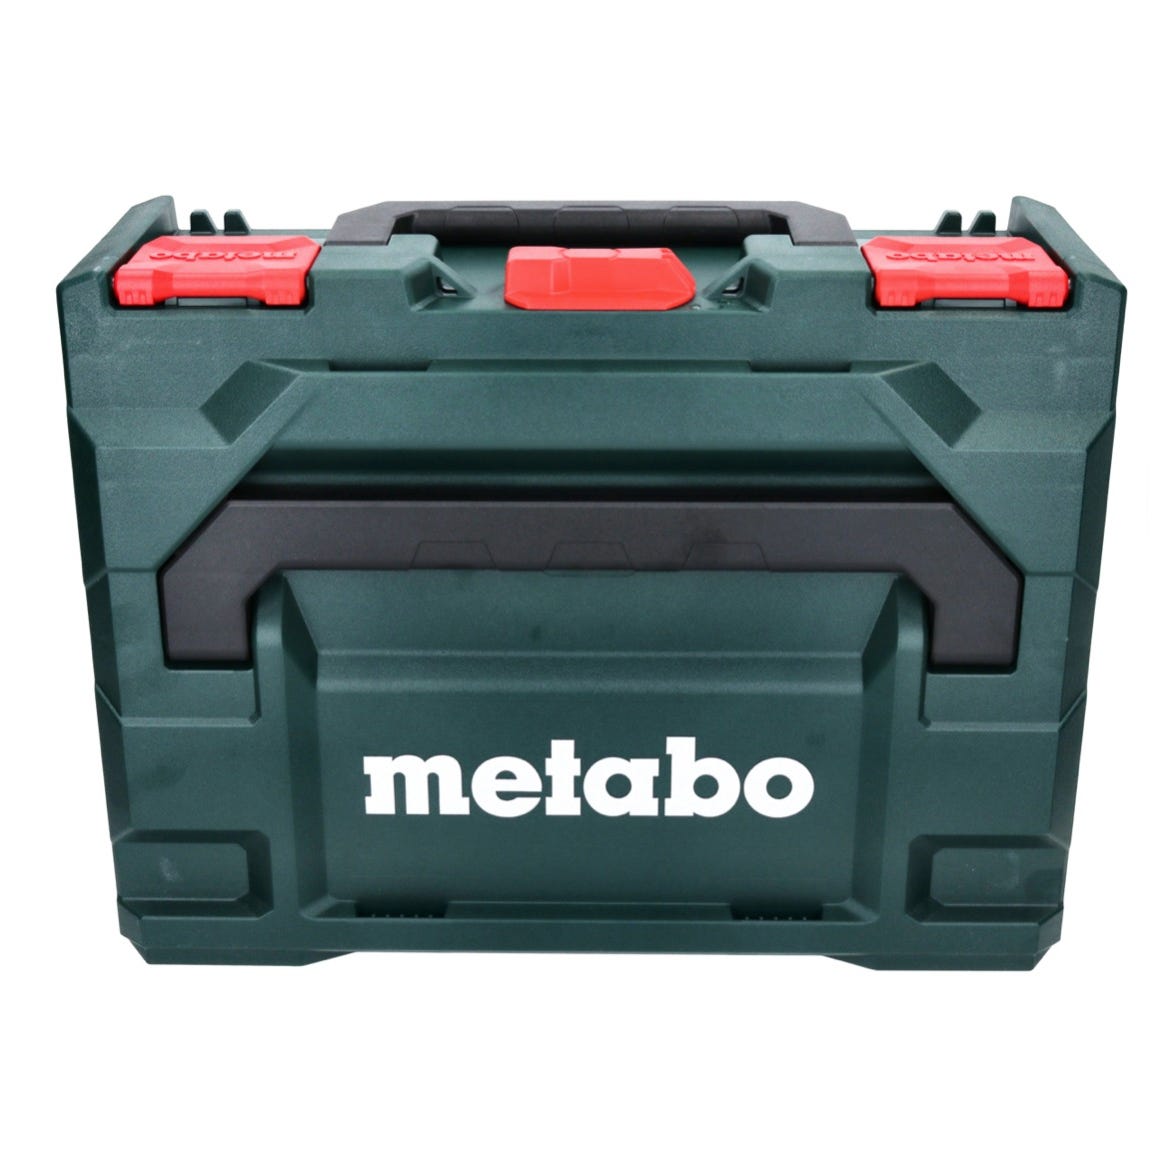 Metabo metaBOX 145 Set: 4x Coffrets 396x296x145mm, système empilable + 4x Inserts universels 2